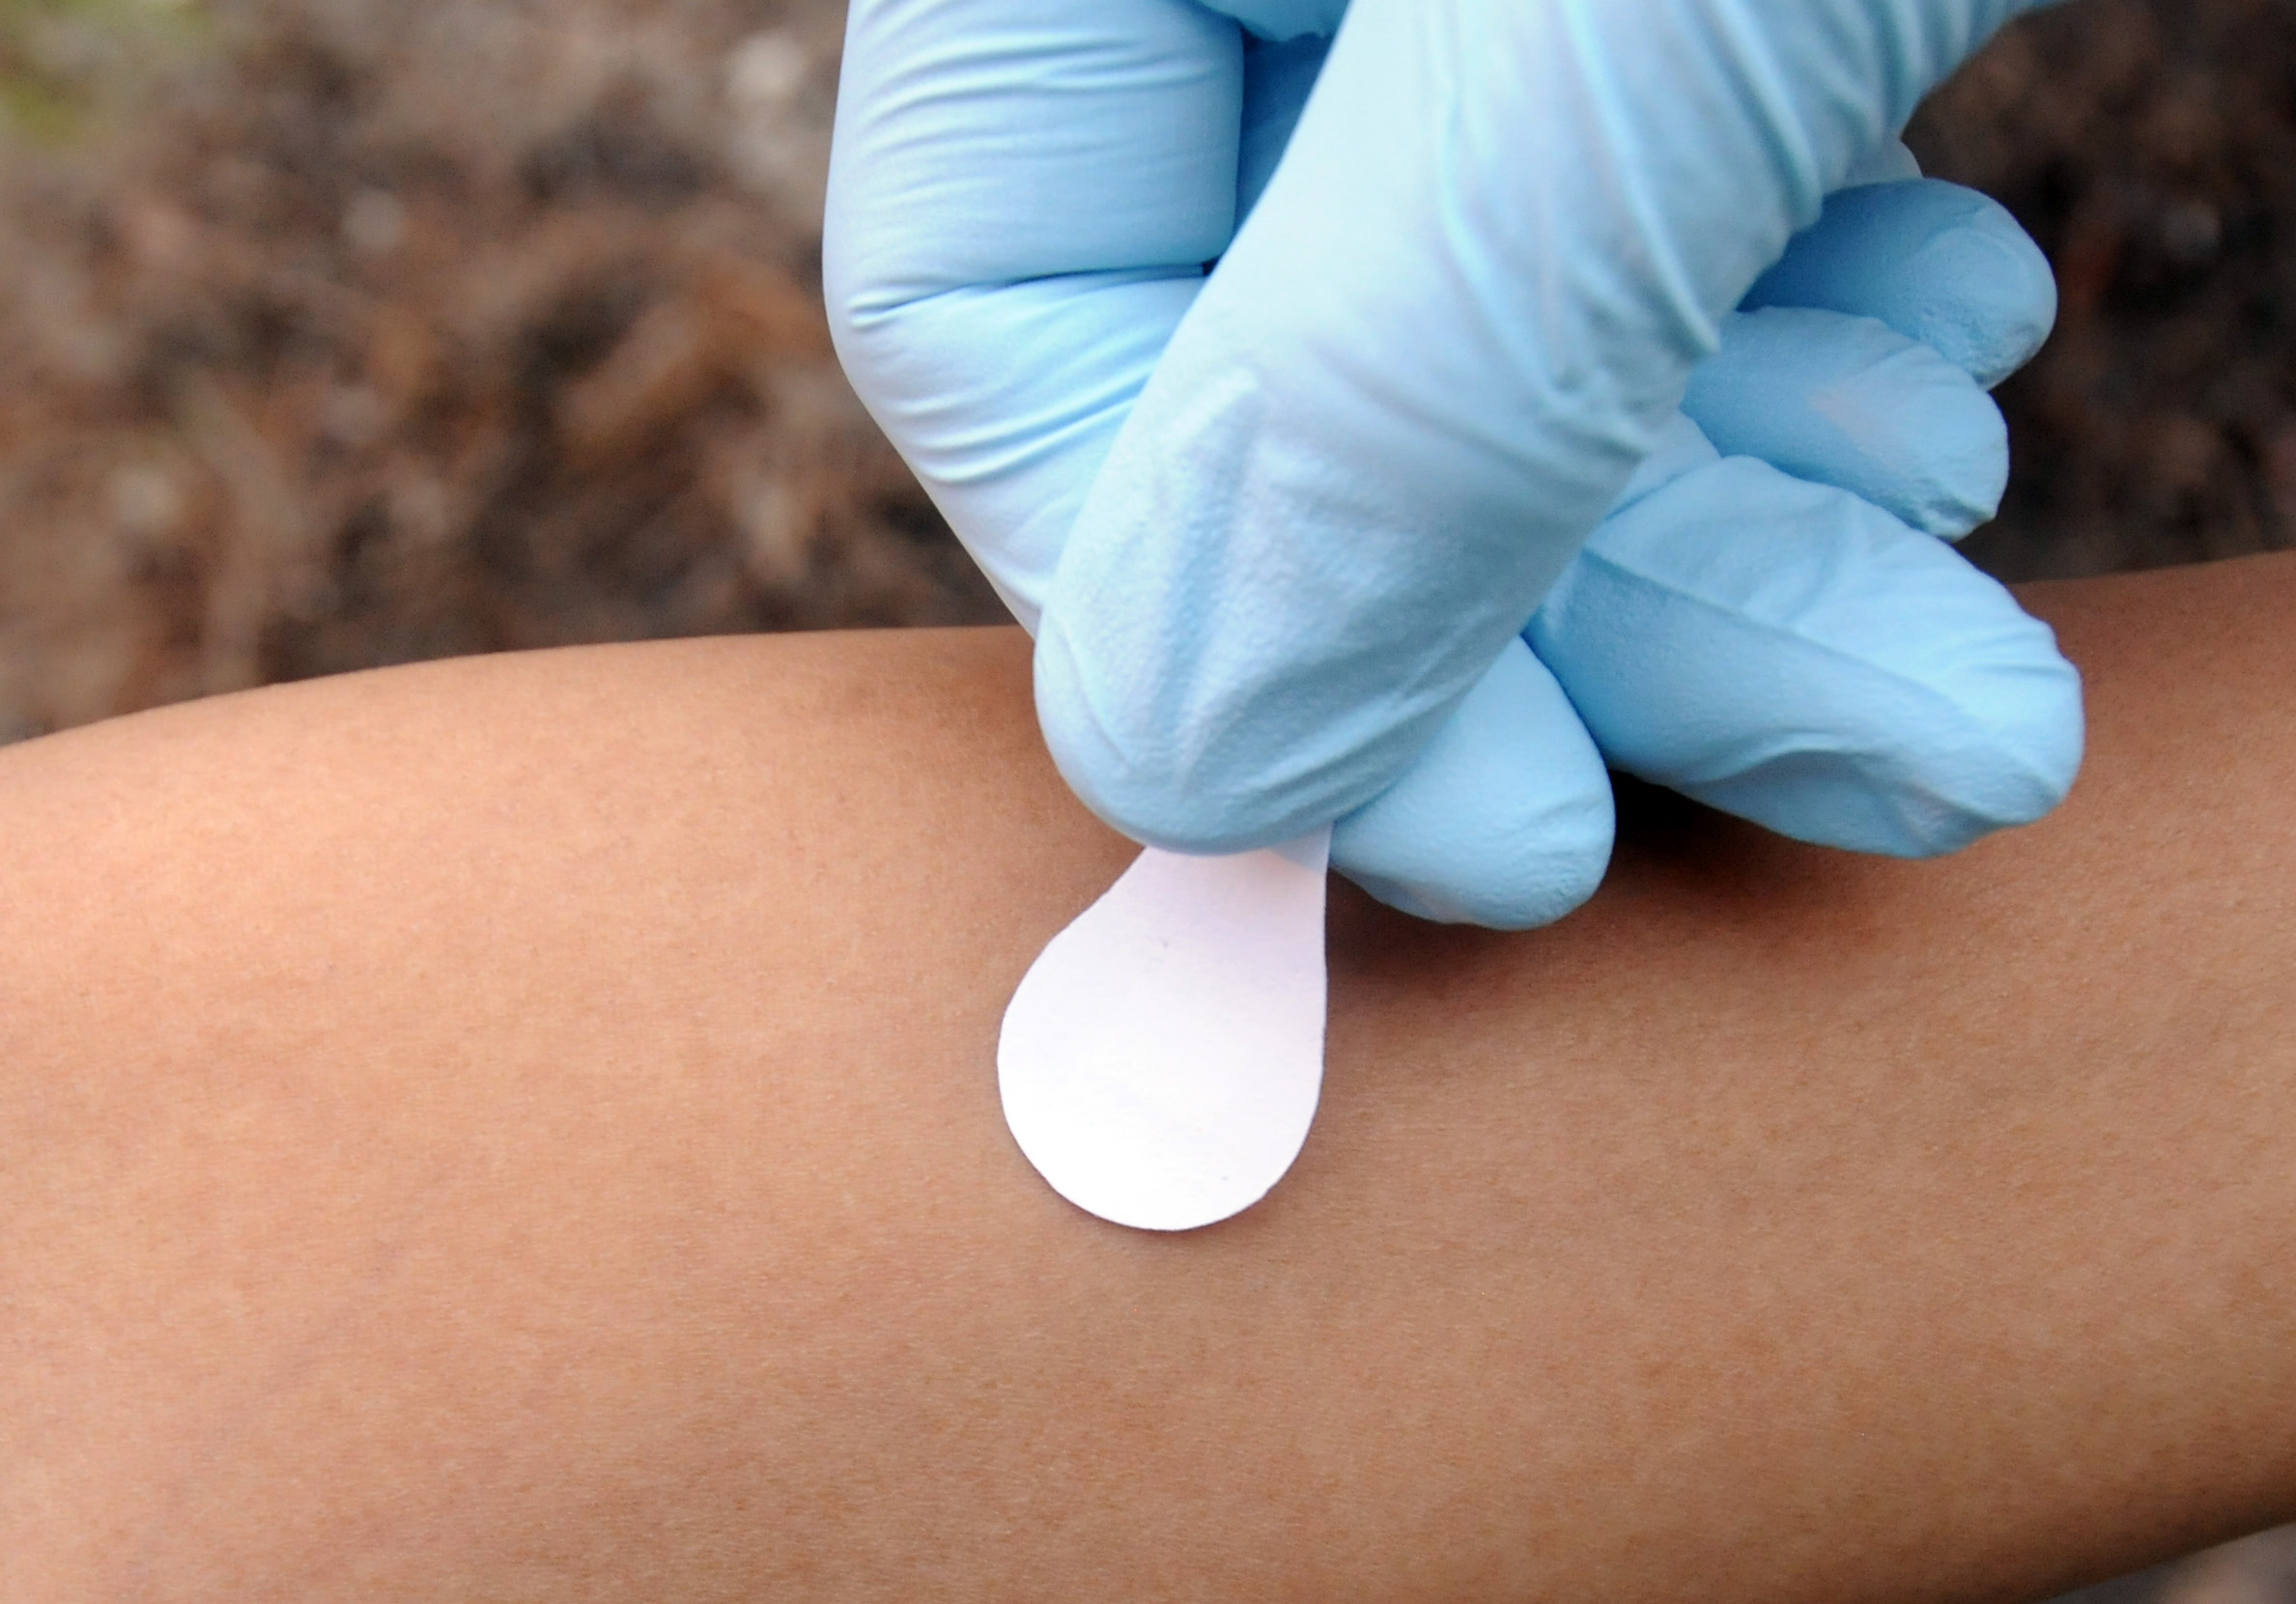 Administering measles vaccine with a microneedle patch could be easier than getting the vaccine through a hypodermic needle. (Photo: Gary Meek)